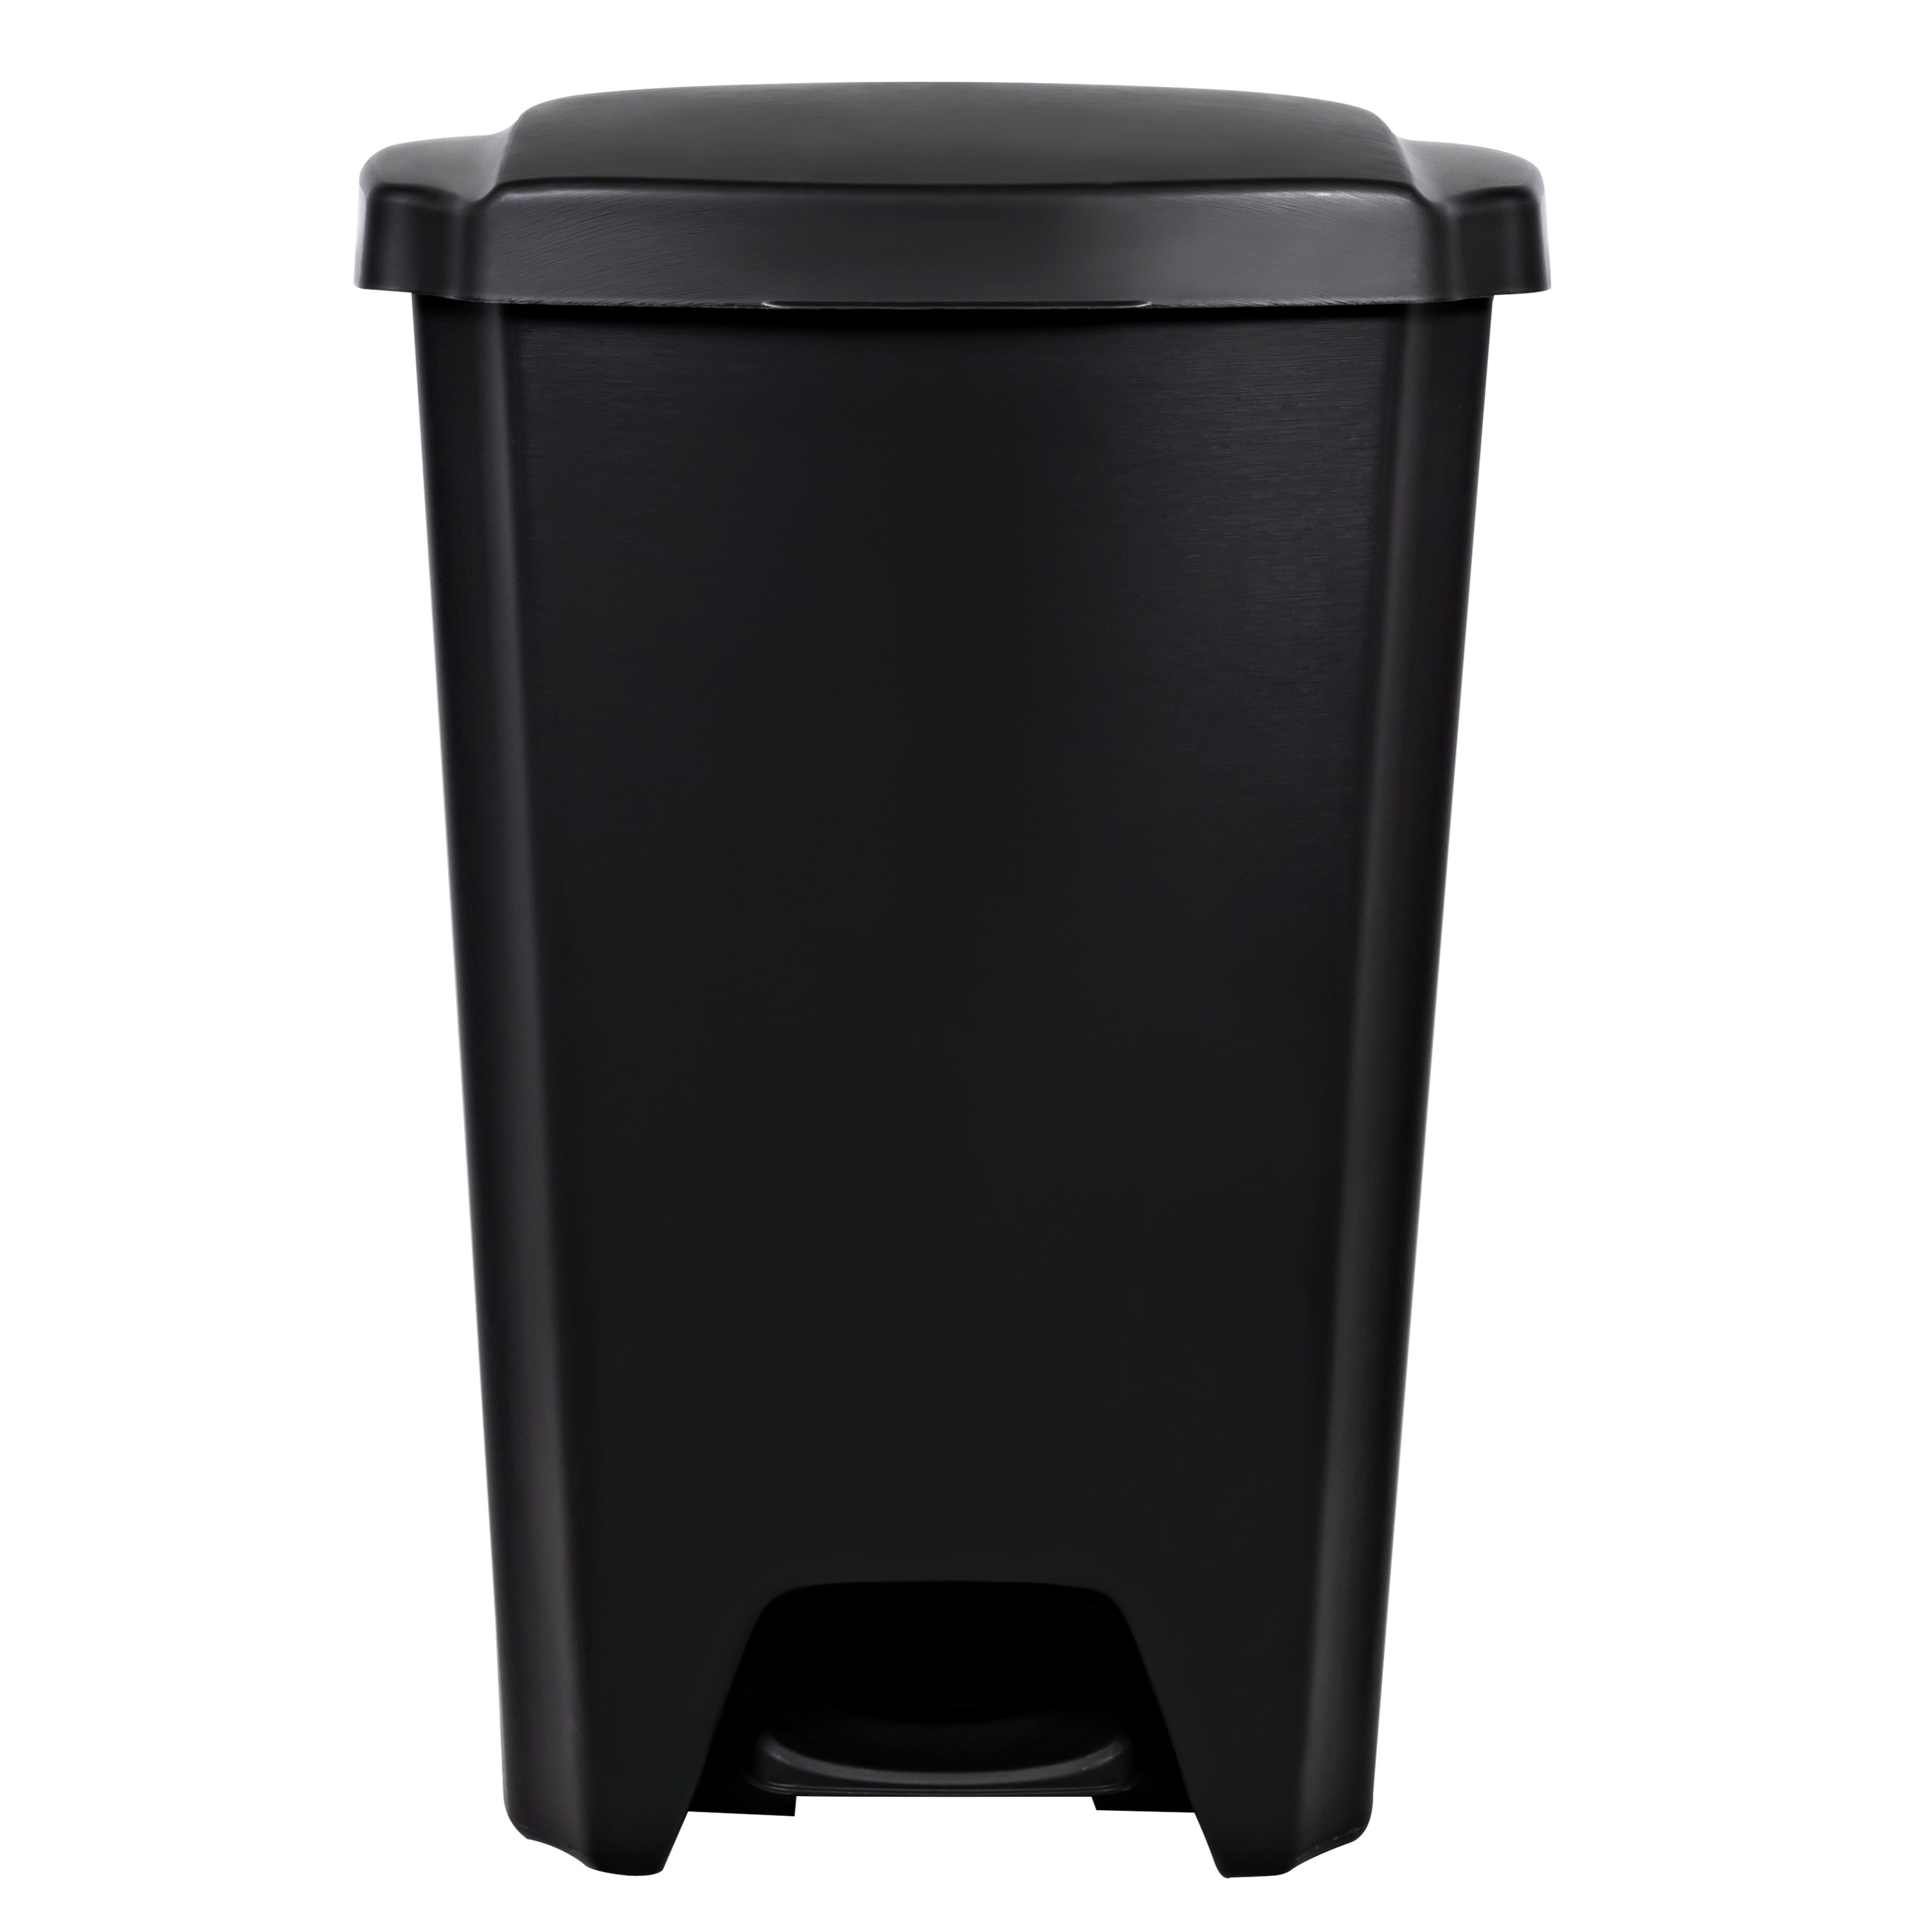 Hefty 12.1 Gallon Trash Can, Plastic Step On Kitchen Trash Can, Black - image 5 of 8